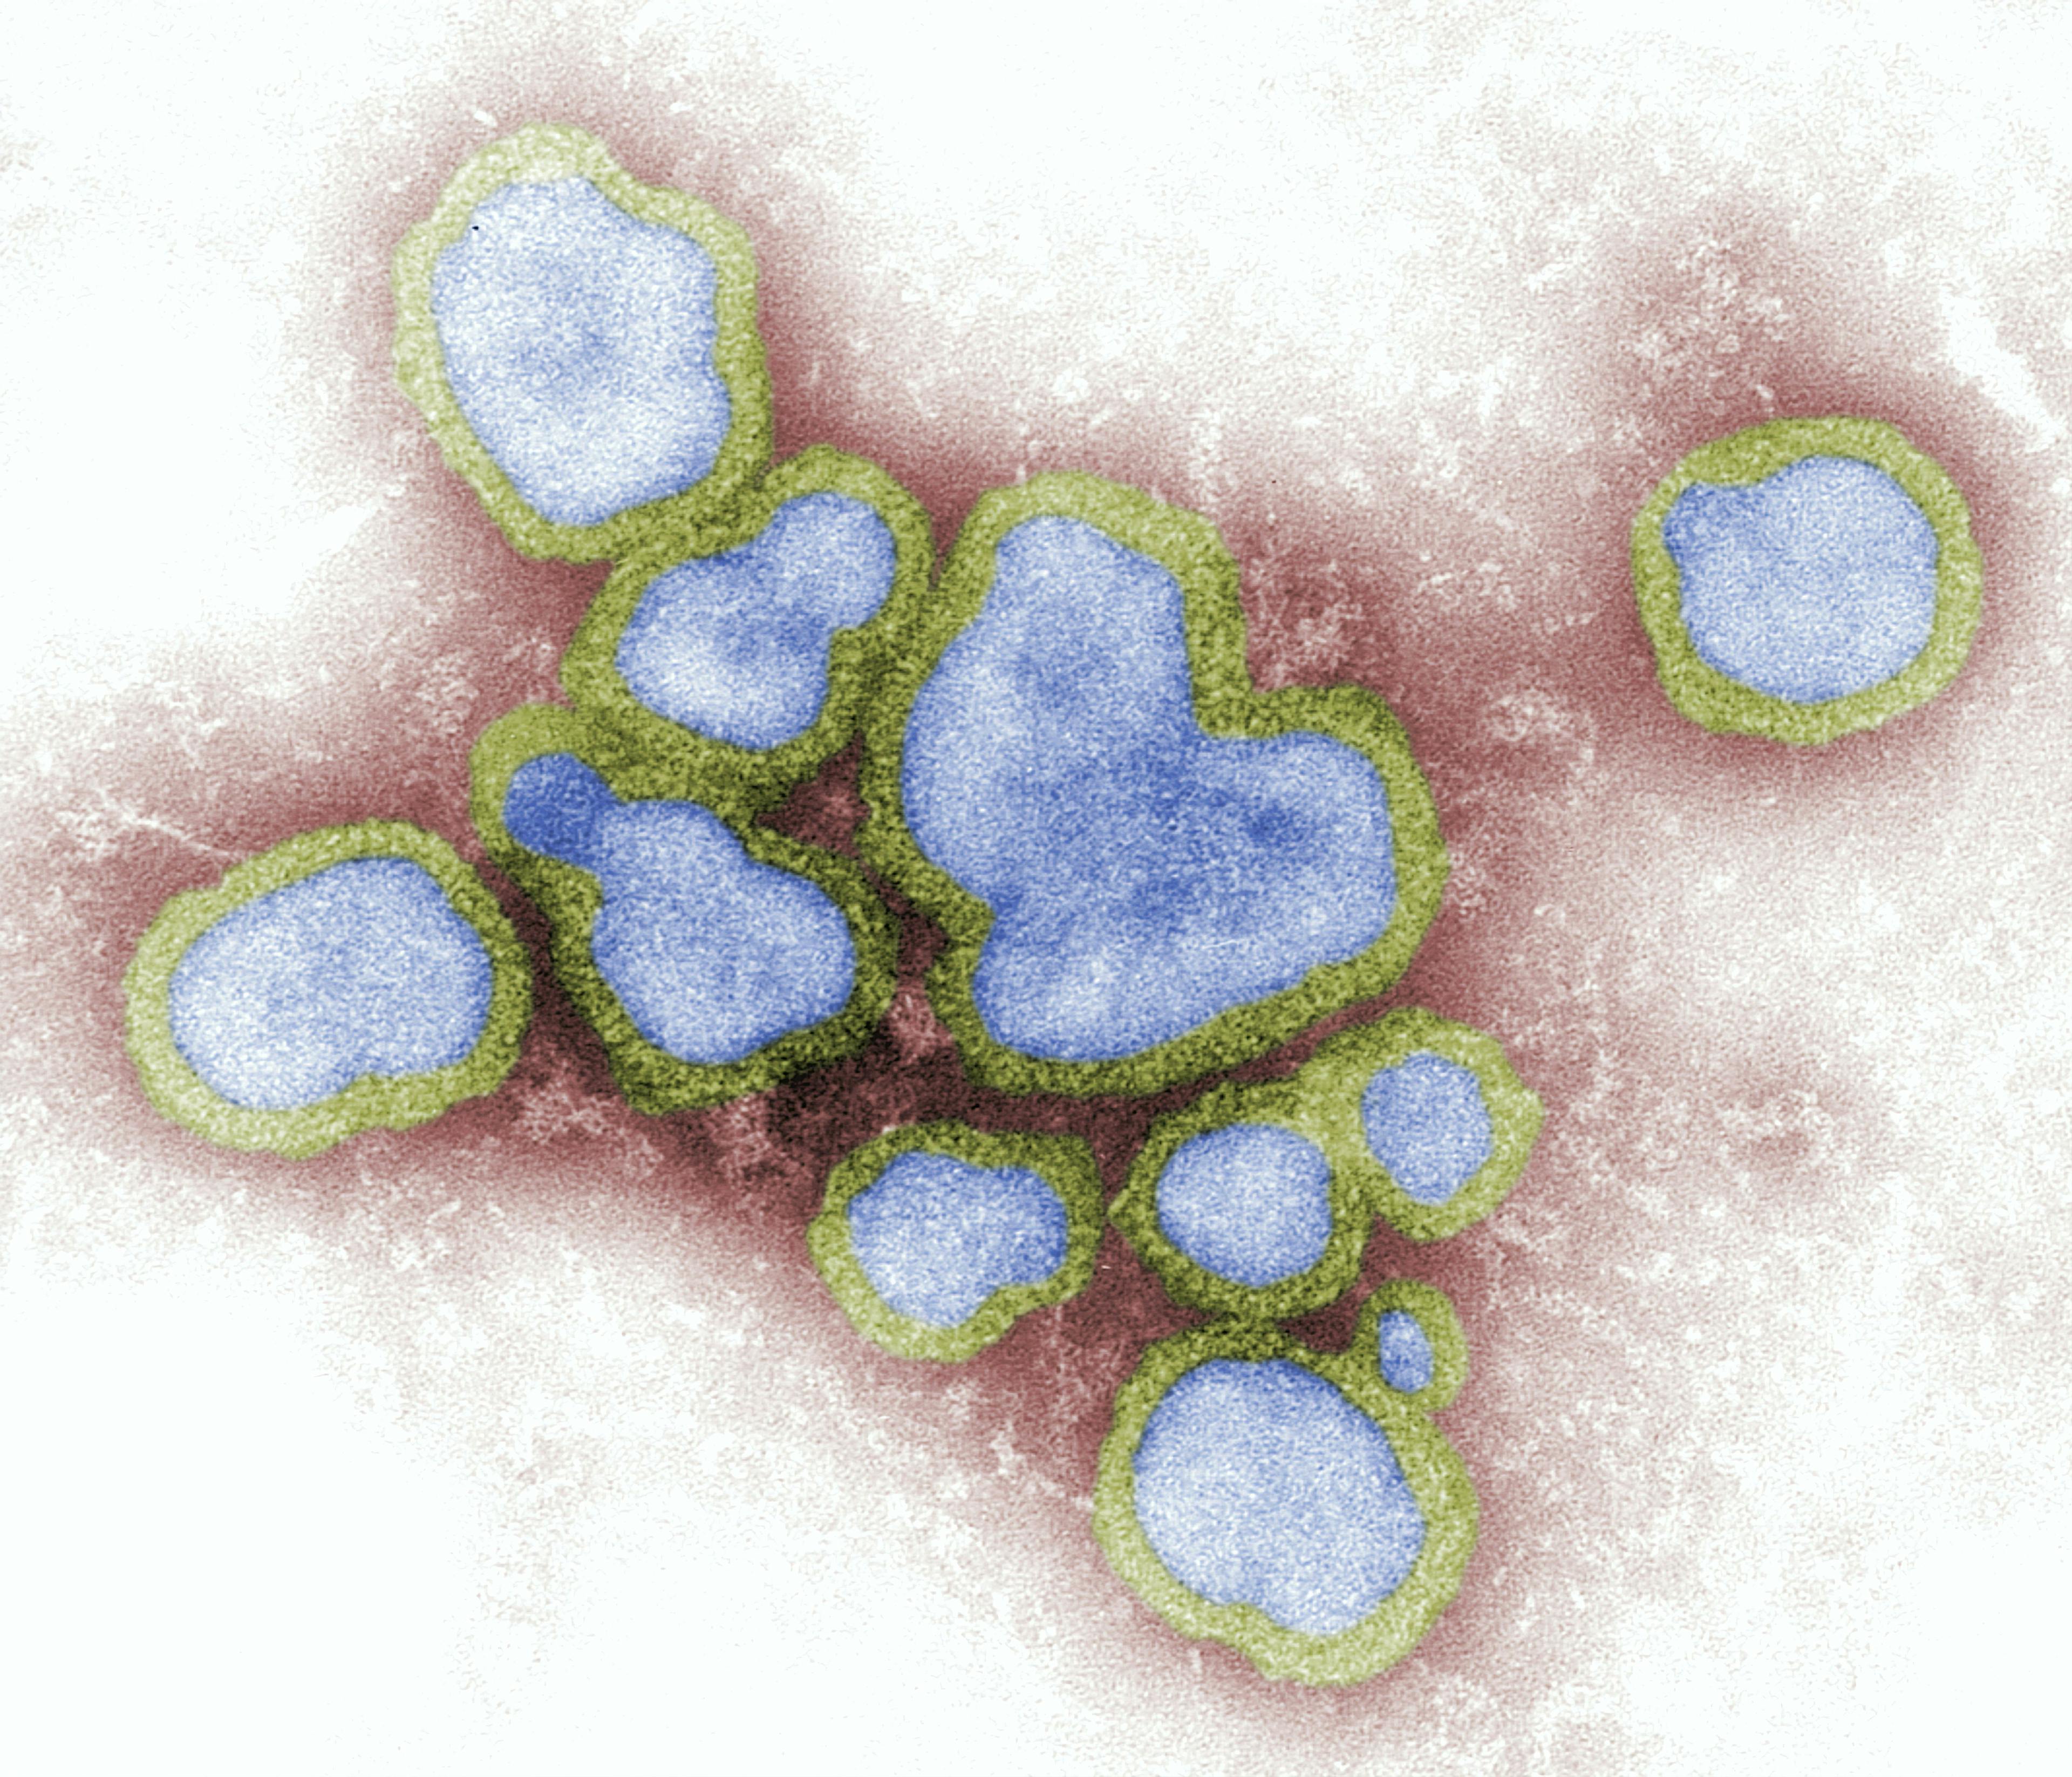 Using Lessons Learned from COVID-19 to Prepare for the Next Influenza Pandemic